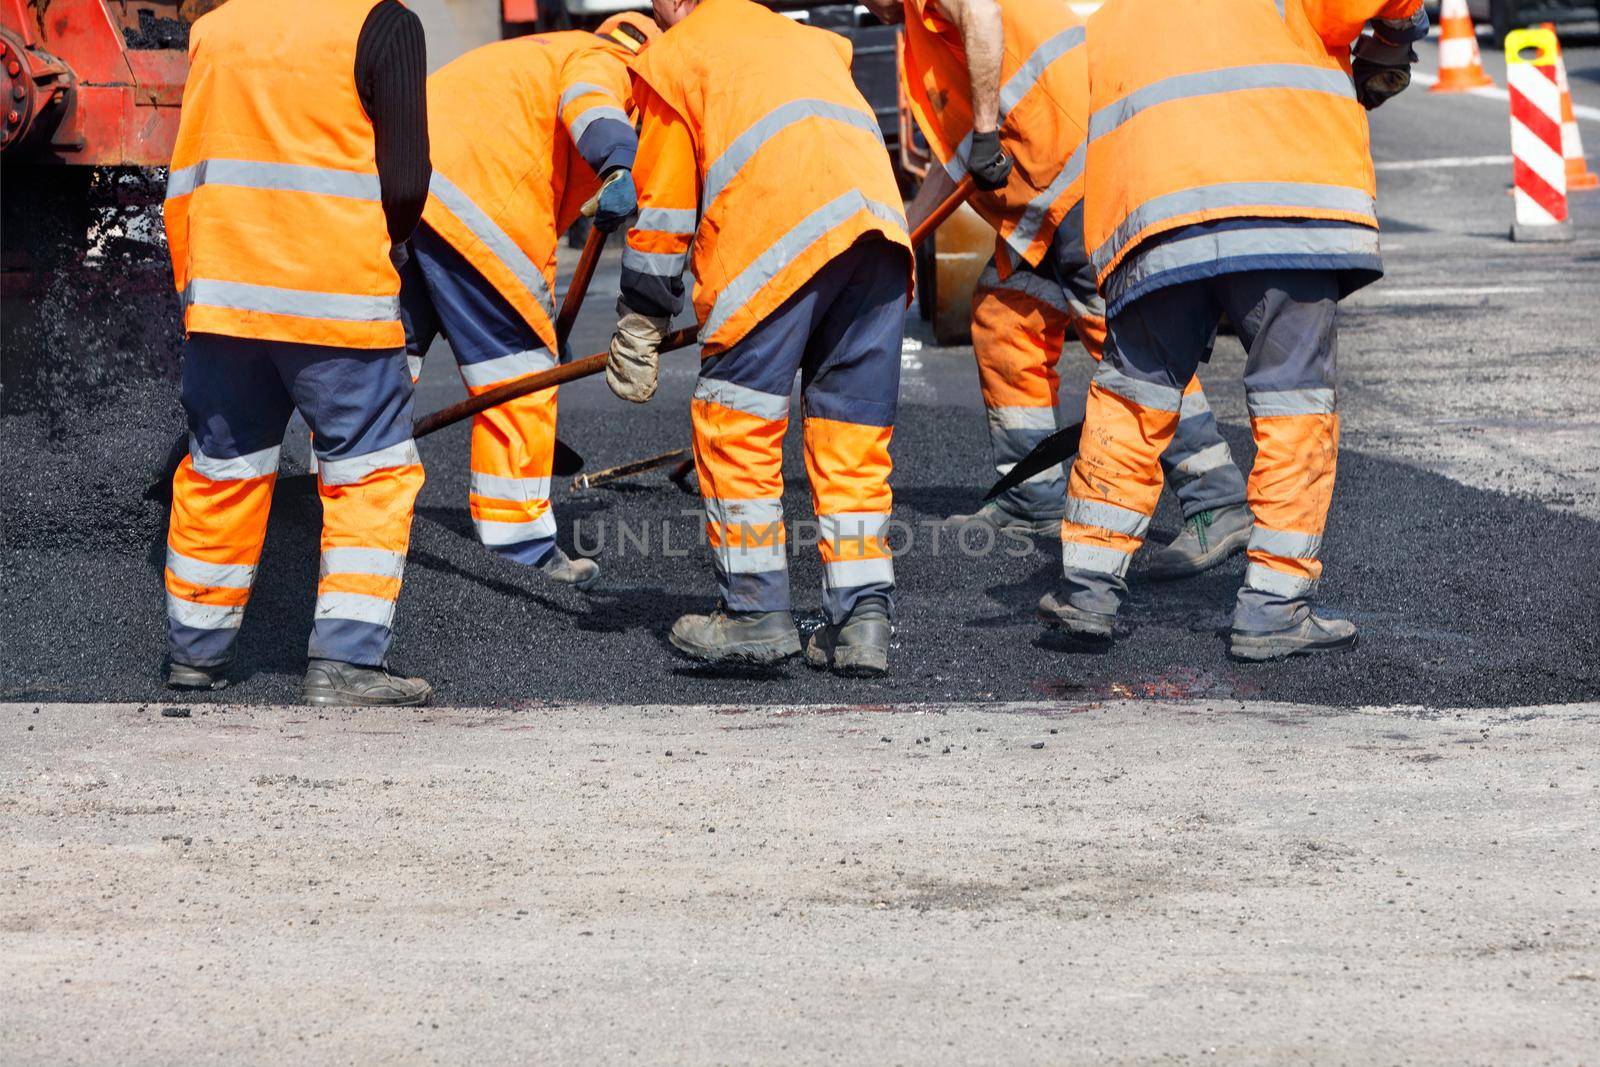 A team of road workers in orange reflective uniforms use shovels to level fresh asphalt on a clear day. by Sergii